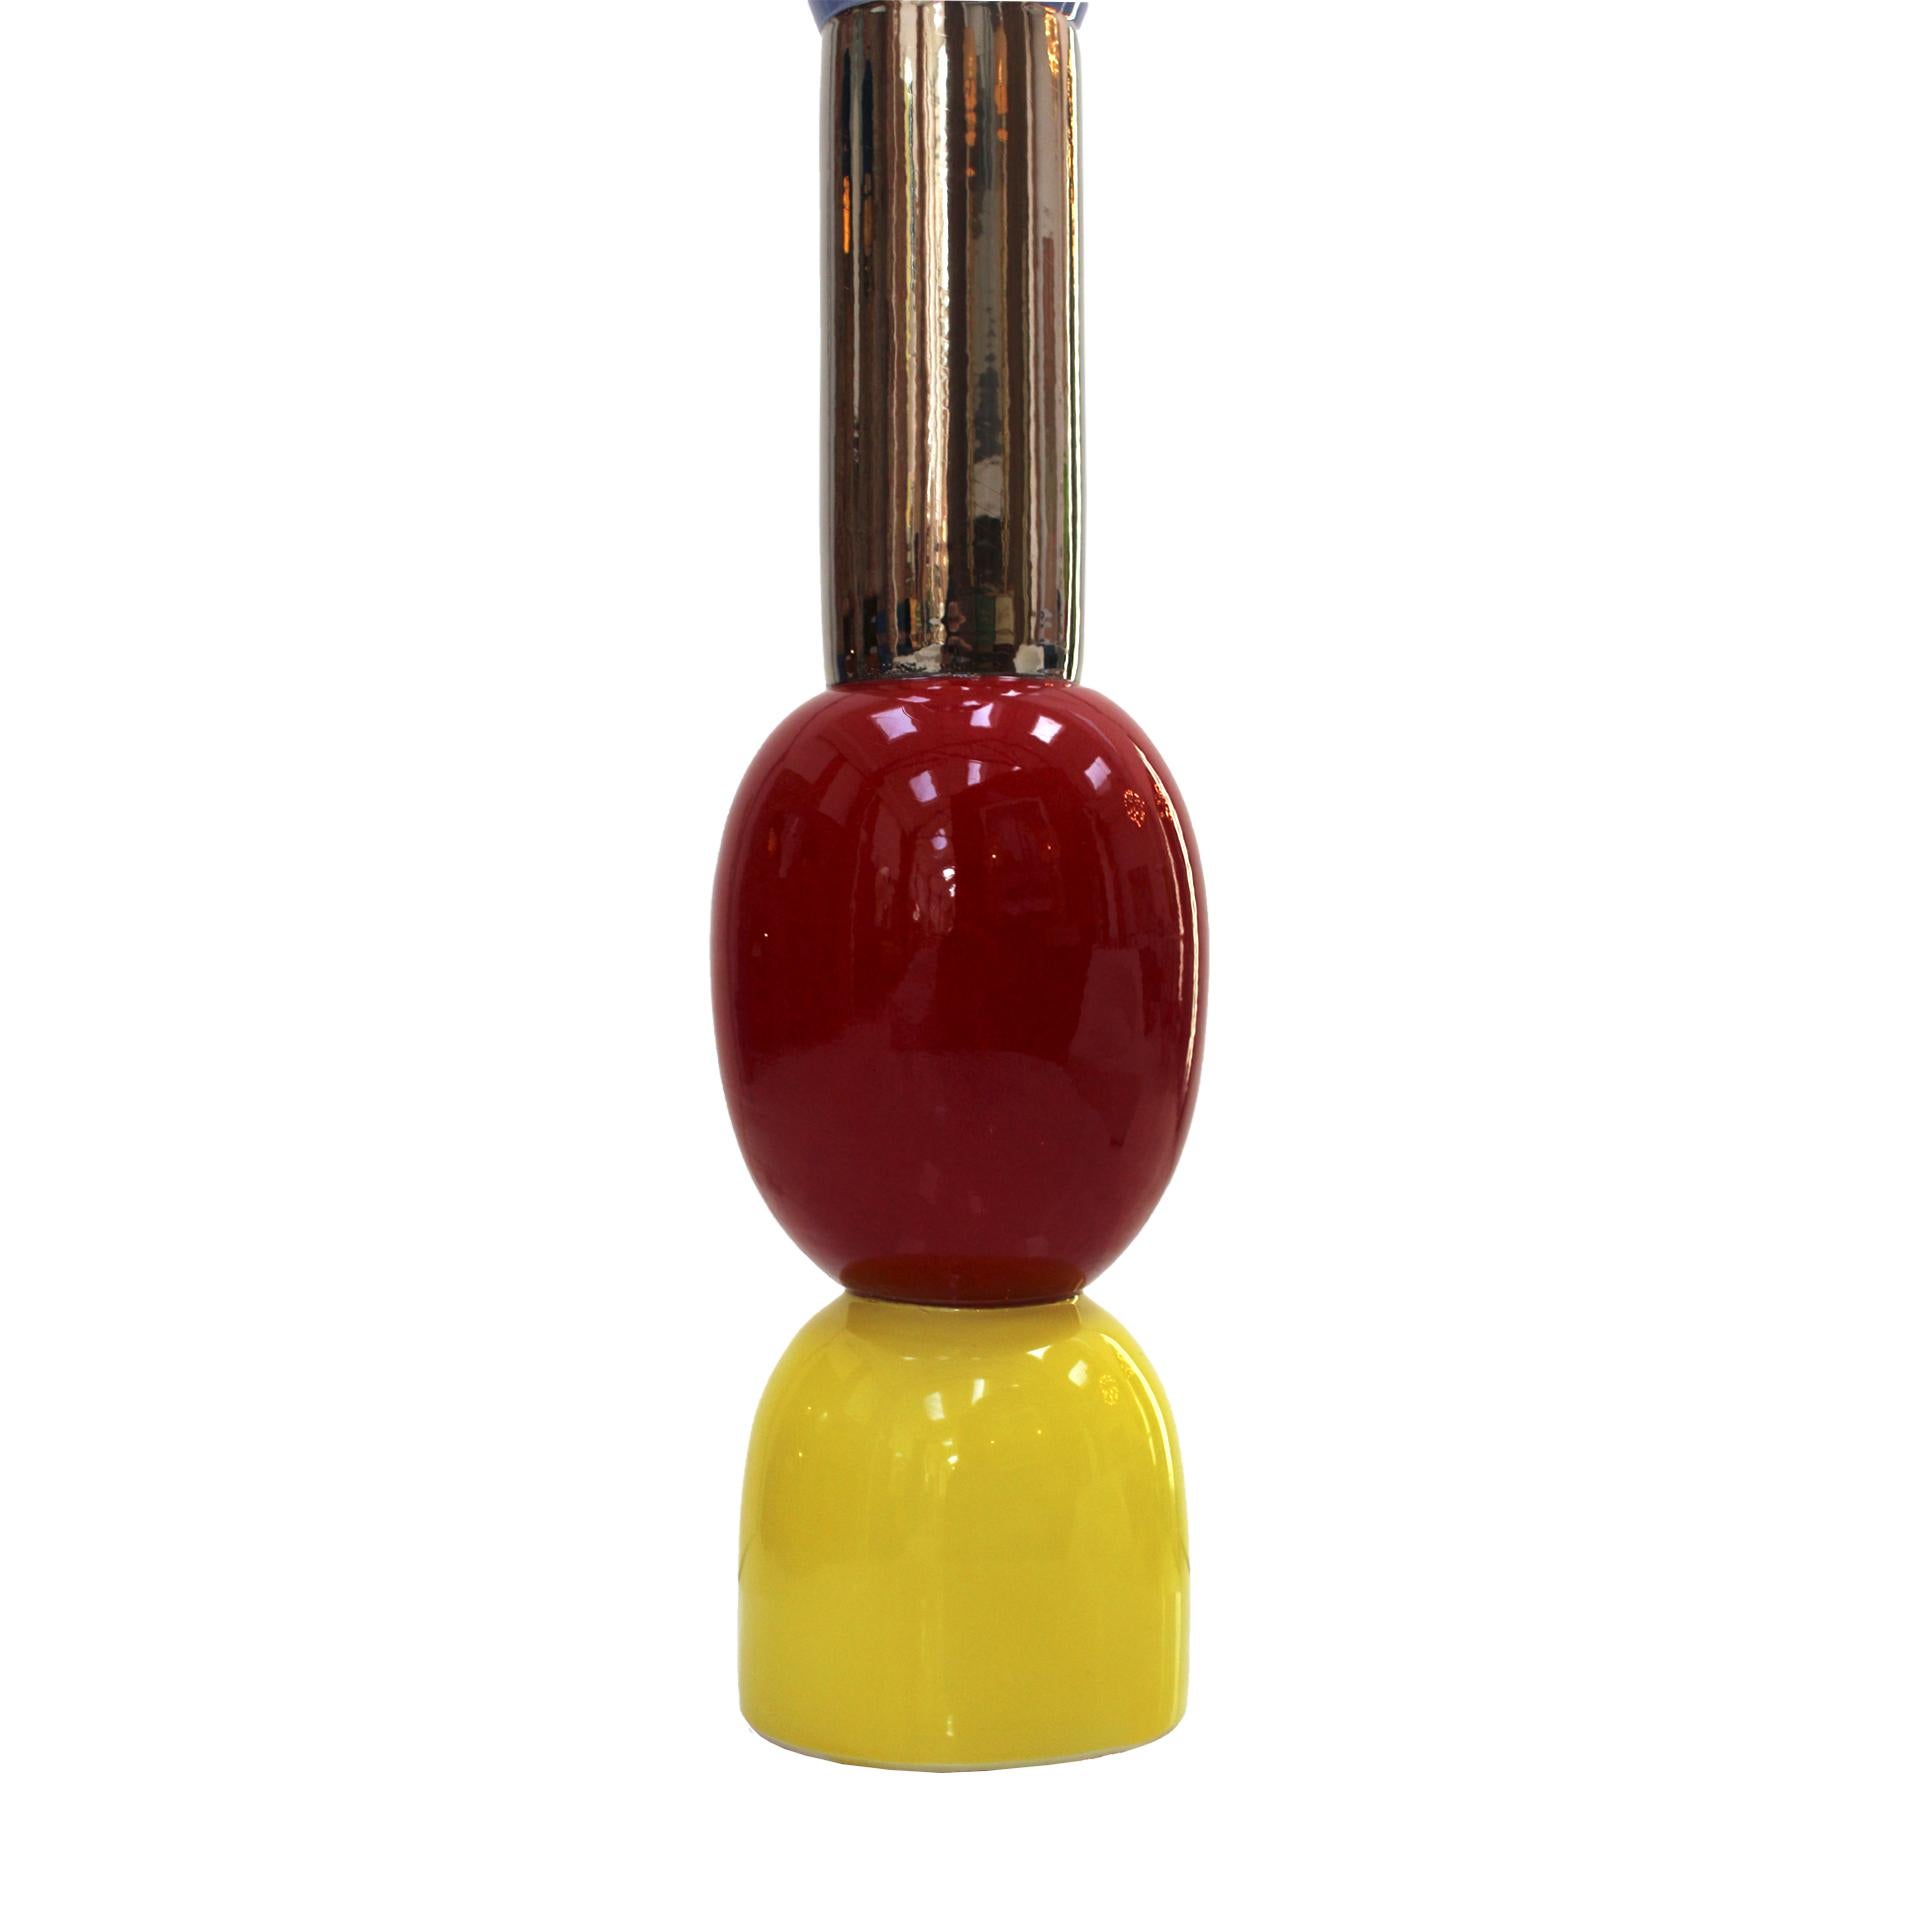 Alessandro Mendini Contemporary Red, Yellow and Blue Ceramic Italian Totem In Good Condition For Sale In Ibiza, Spain